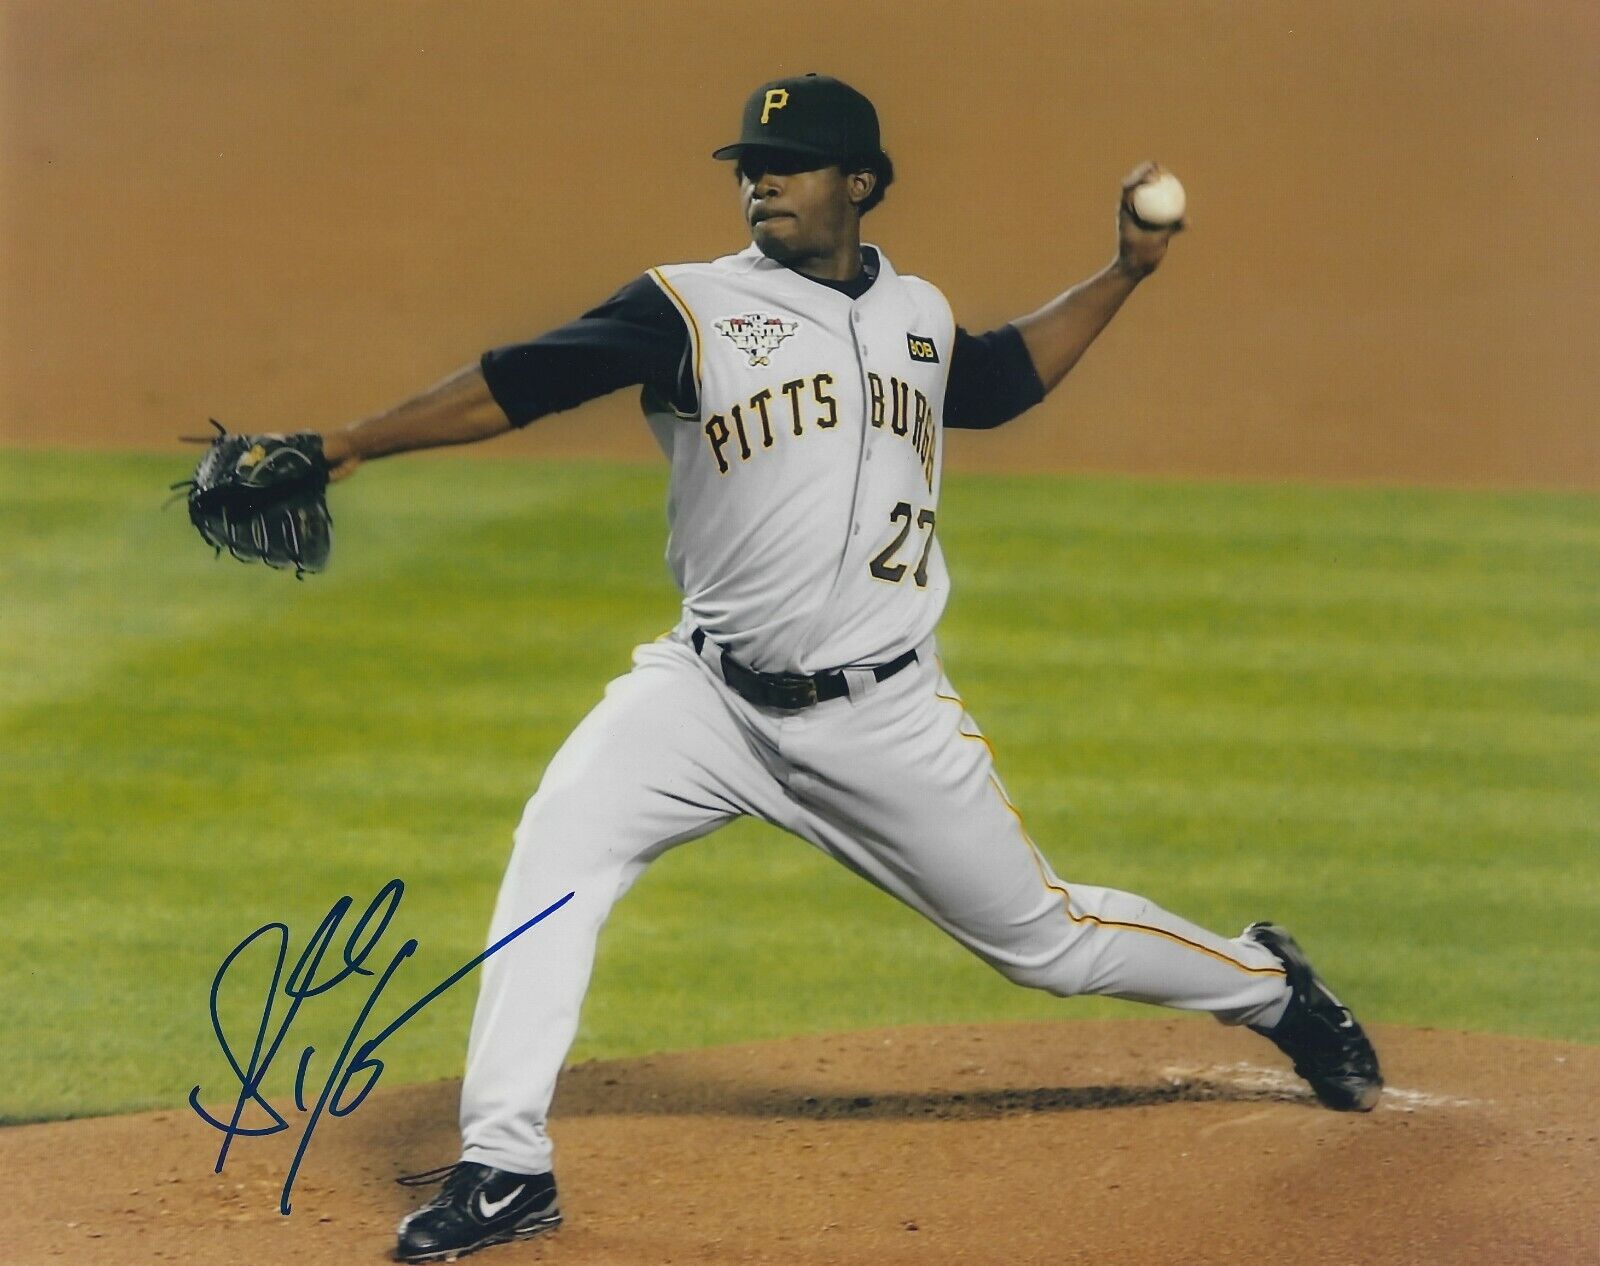 Autographed 8x10 SHANE YOUMAN Pittsburgh Pirates Photo Poster painting w/COA